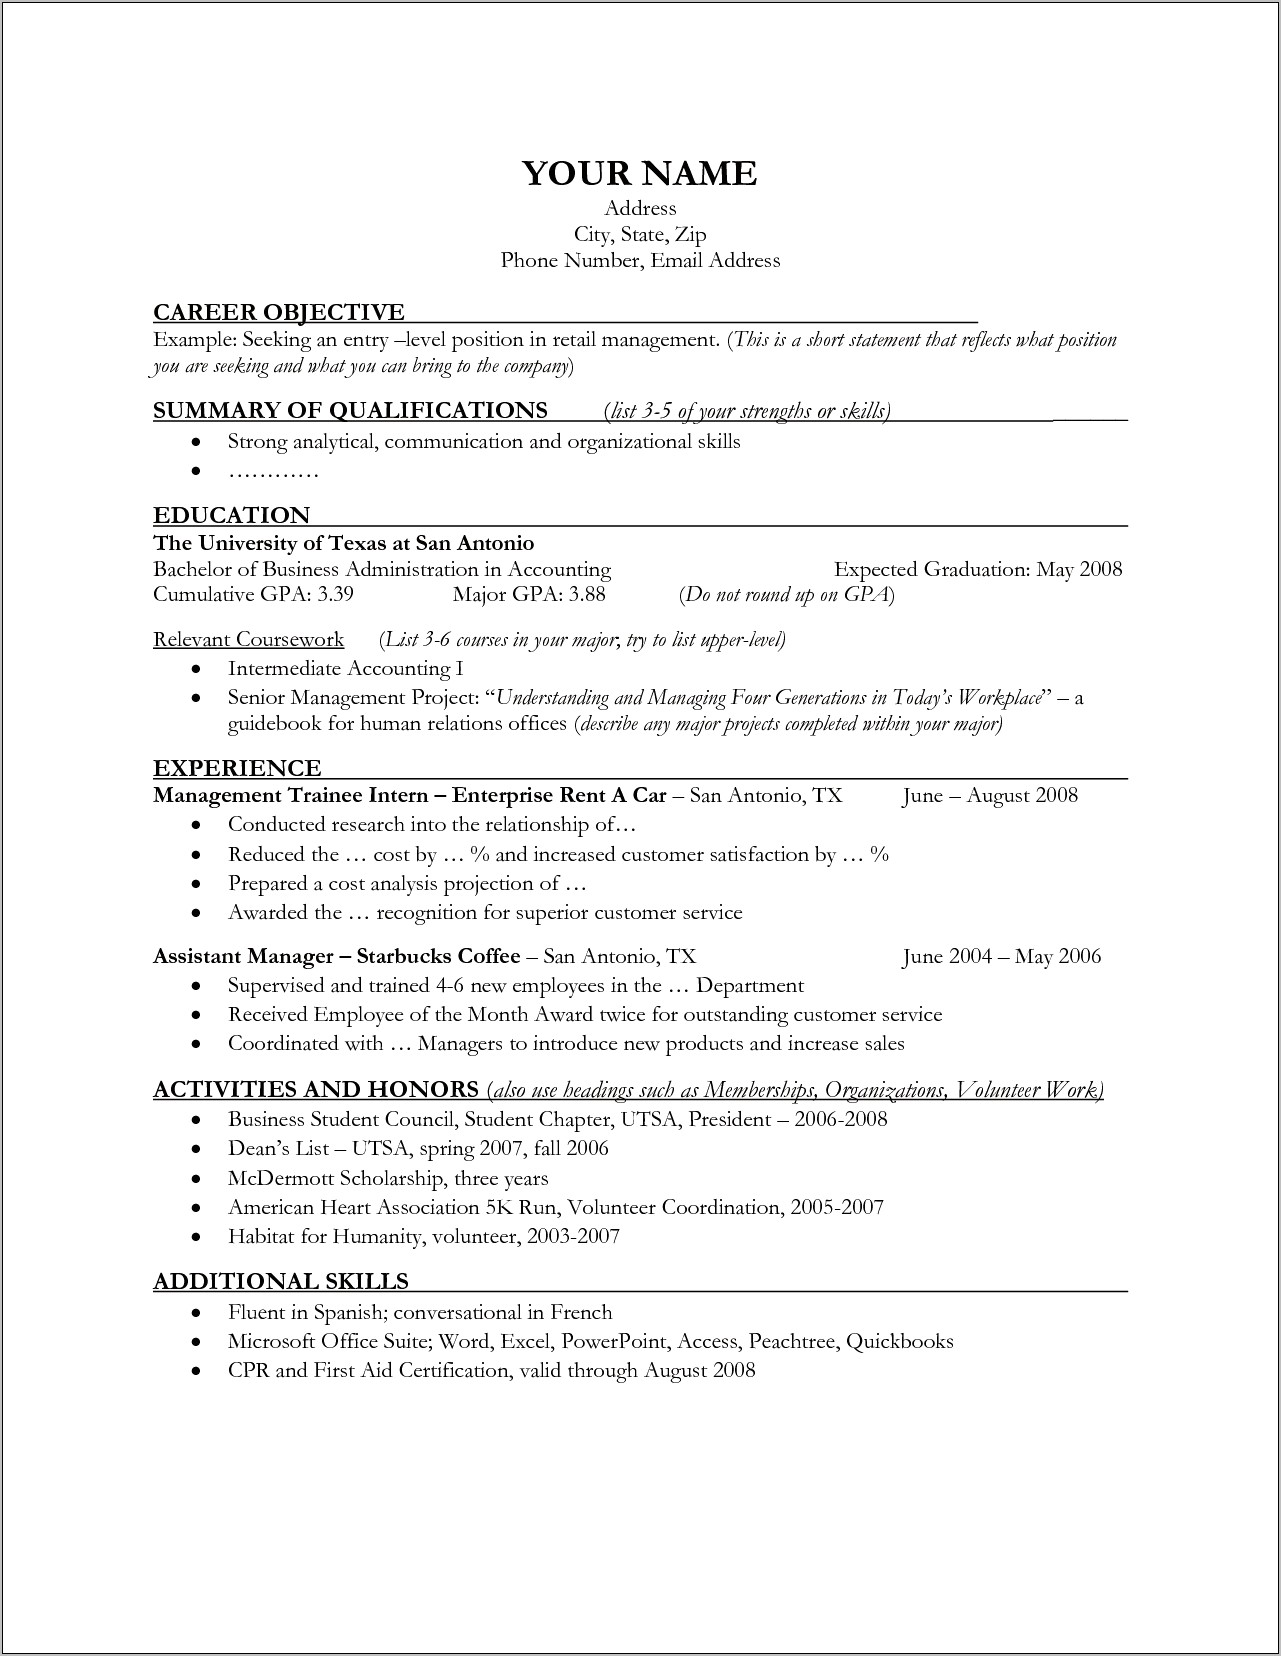 Retail Resume Objective Or Summary